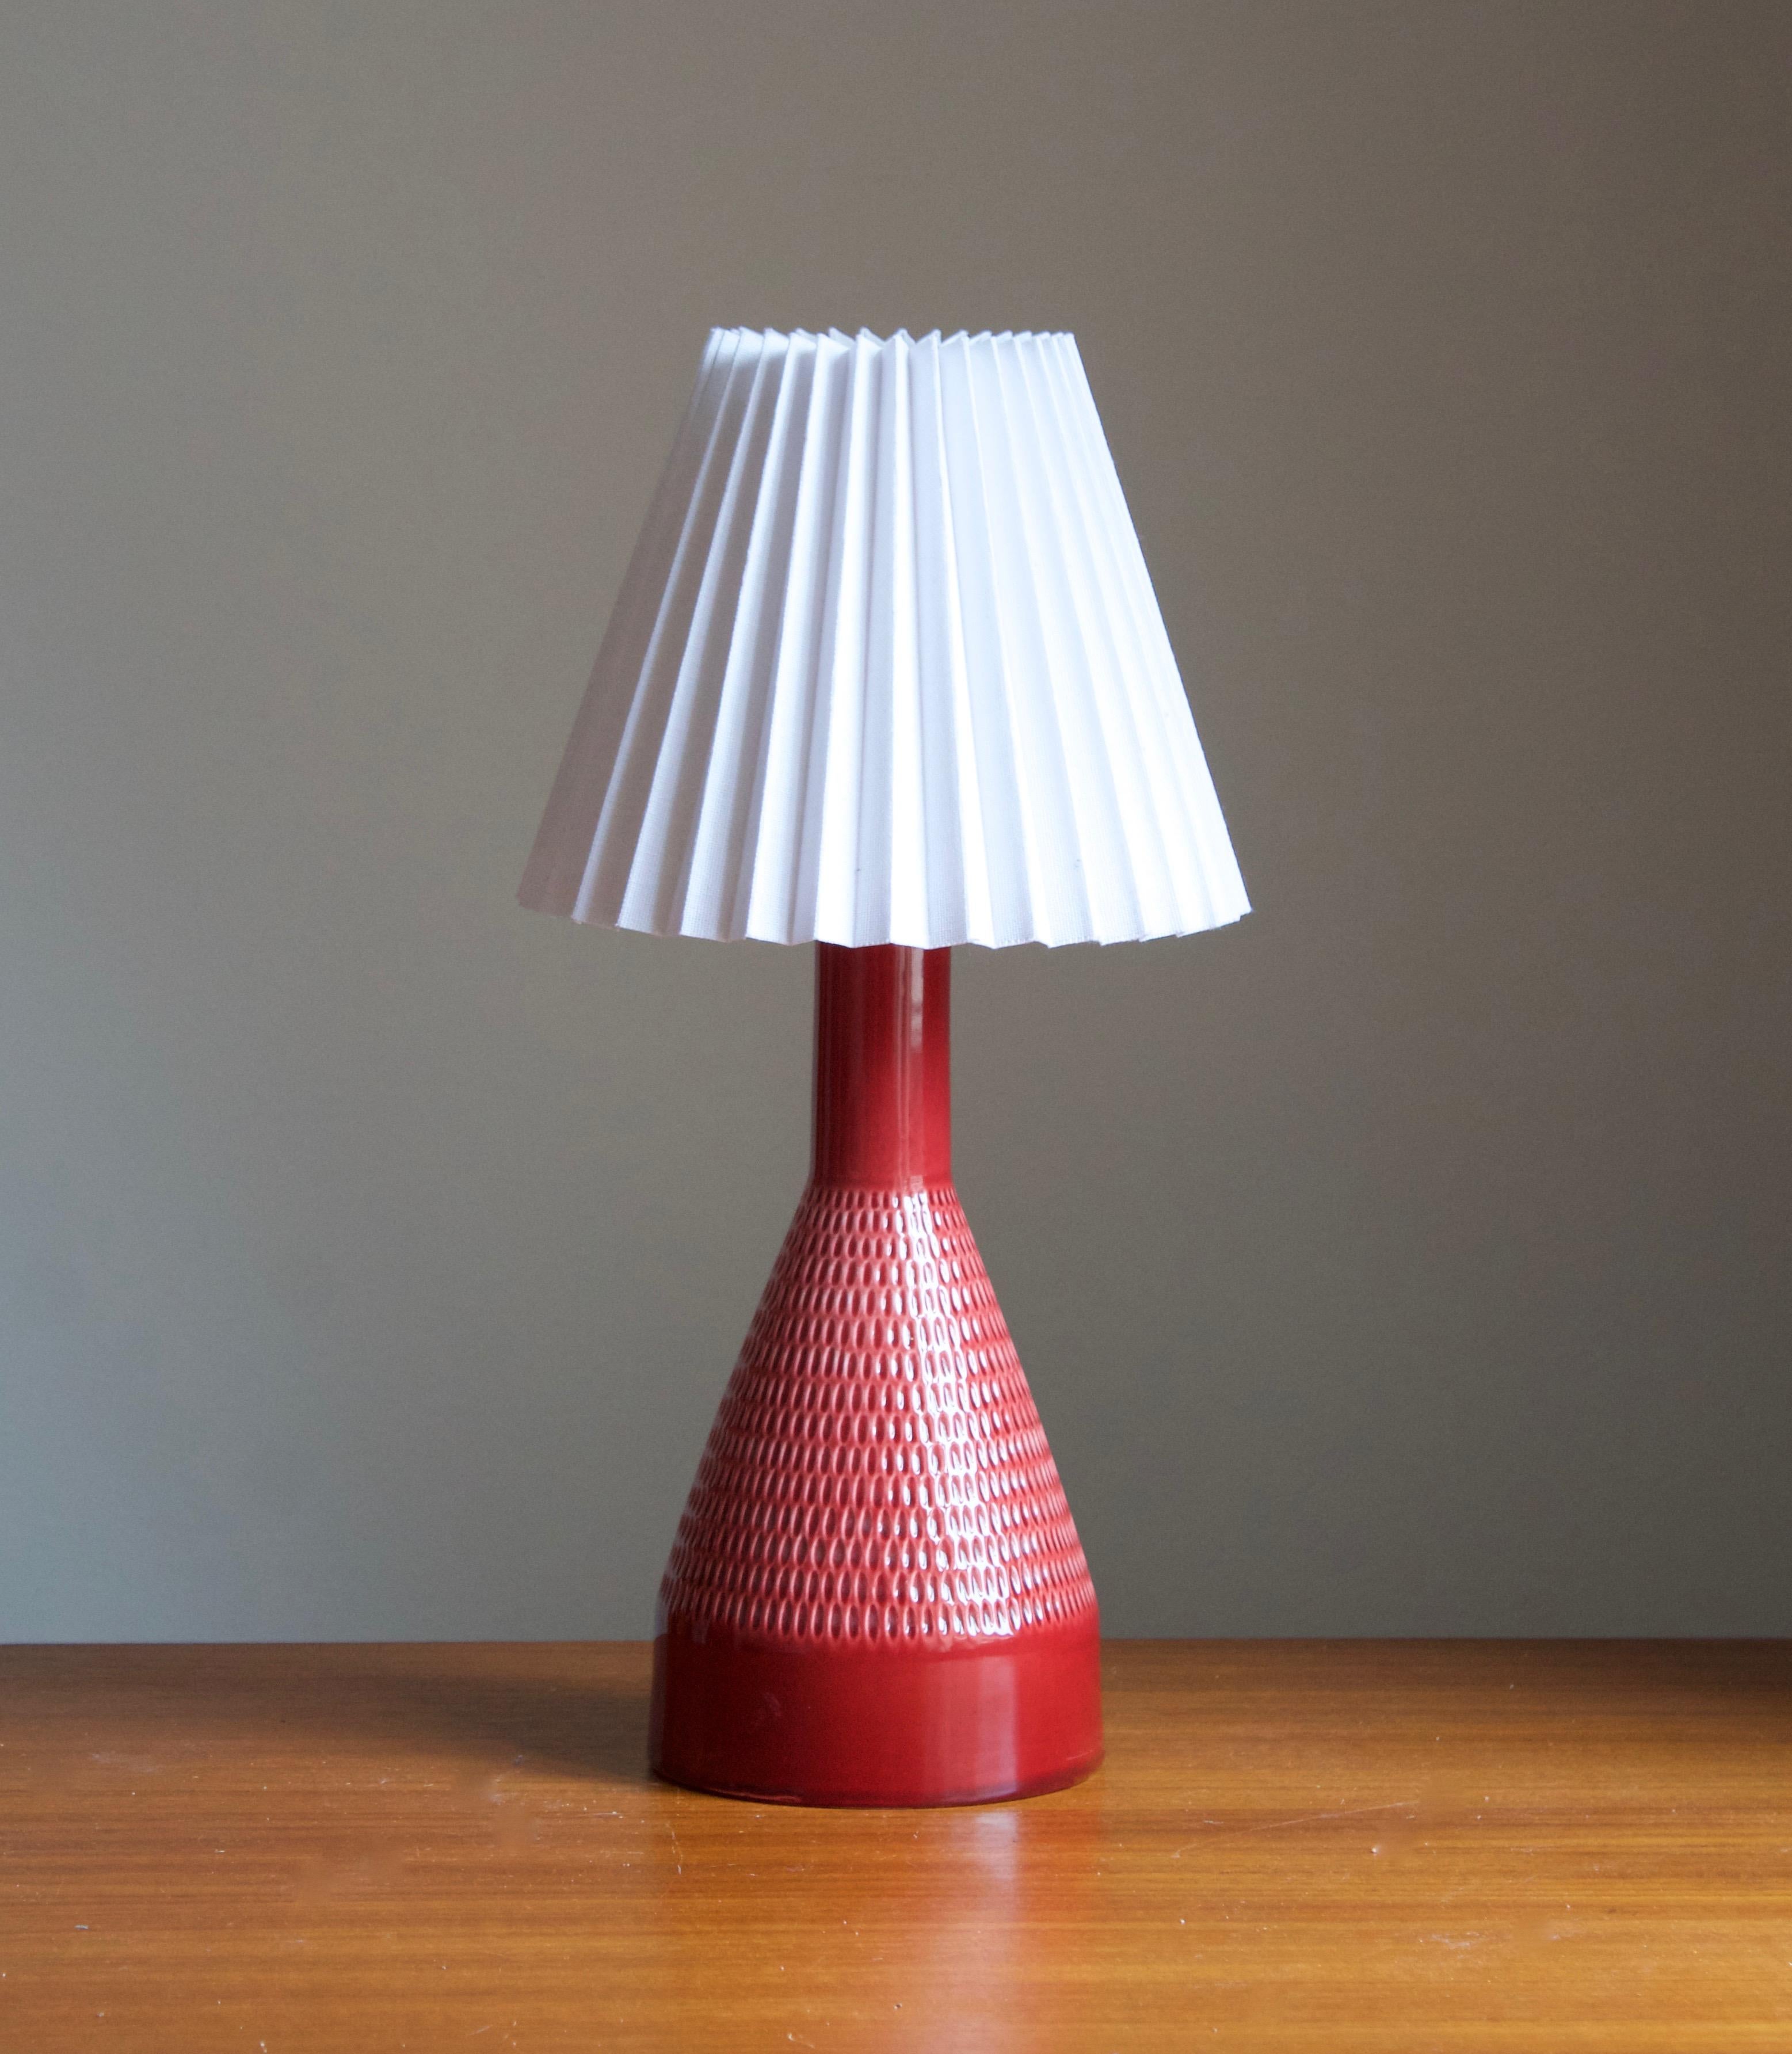 A pair of table lamp produced by Rörstand, Sweden, c. 1960s. Stamped. Base in red glazed ceramic with simple incised ornamentation.

Stated dimensions exclude lampshade, height includes socket. Upon request illustrated lampshade can be included in